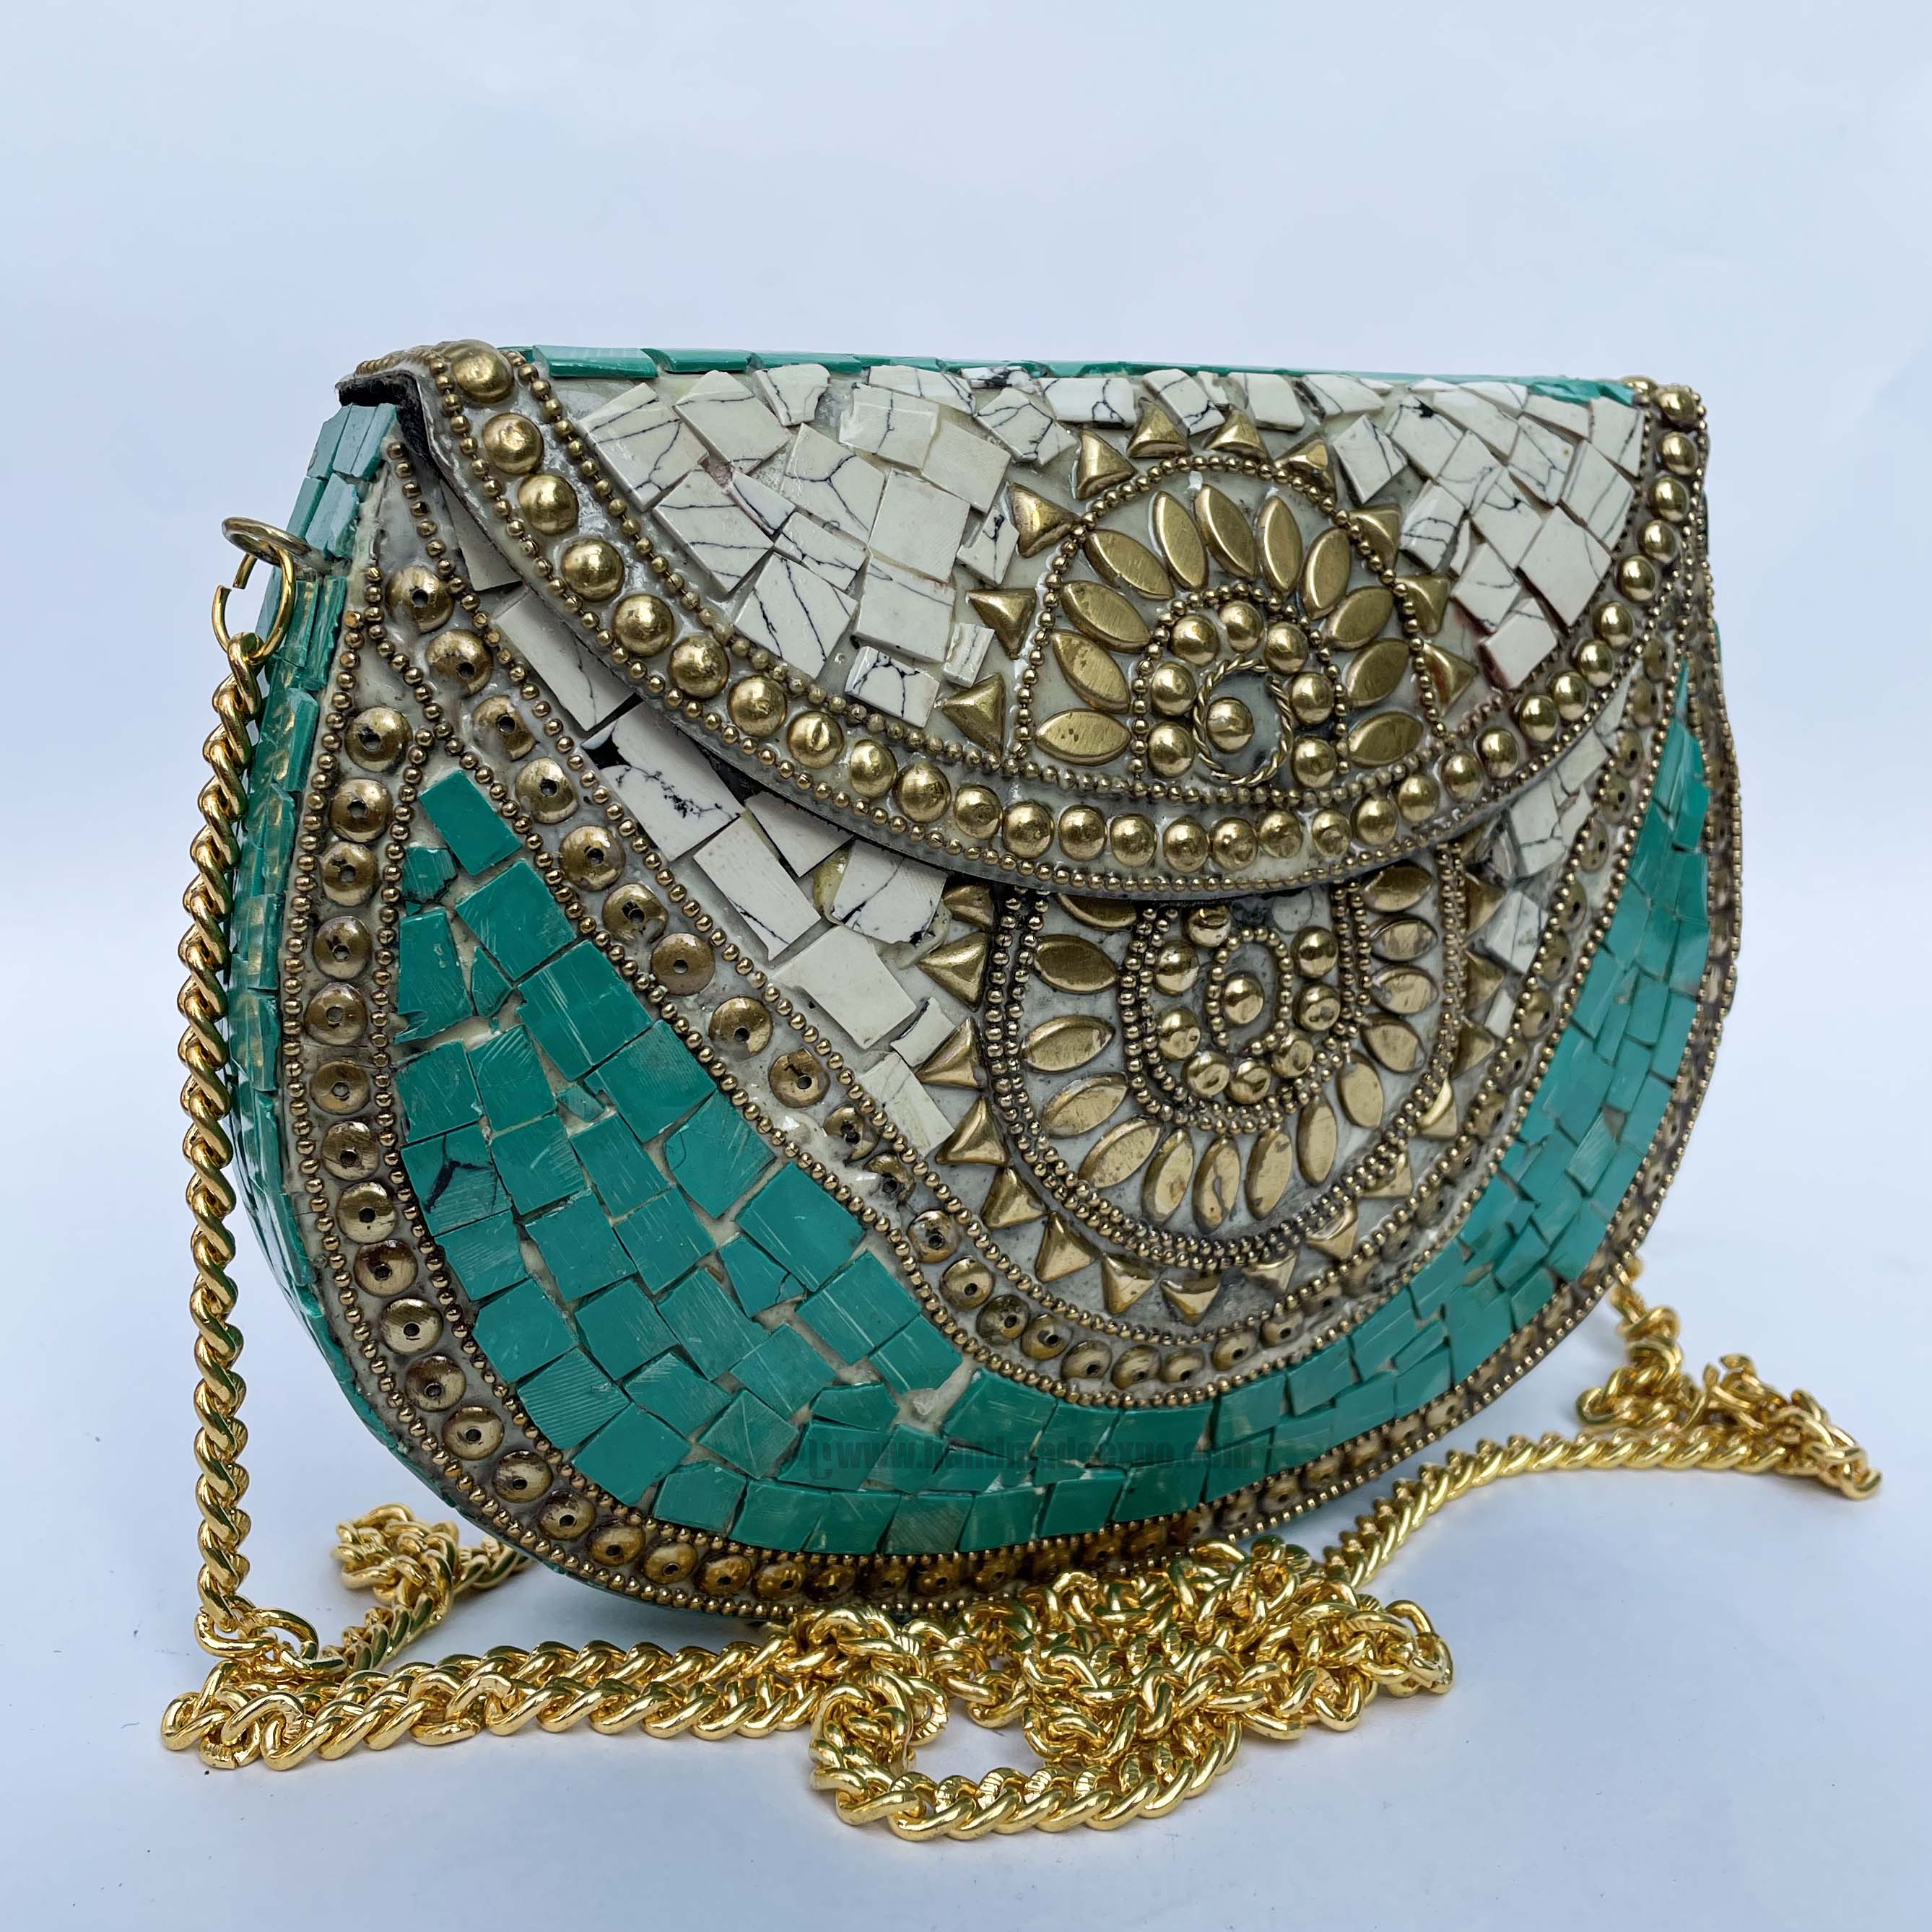 Nepali Handmade Big Ladies Bag With stone Setting, metal, golden And Blue